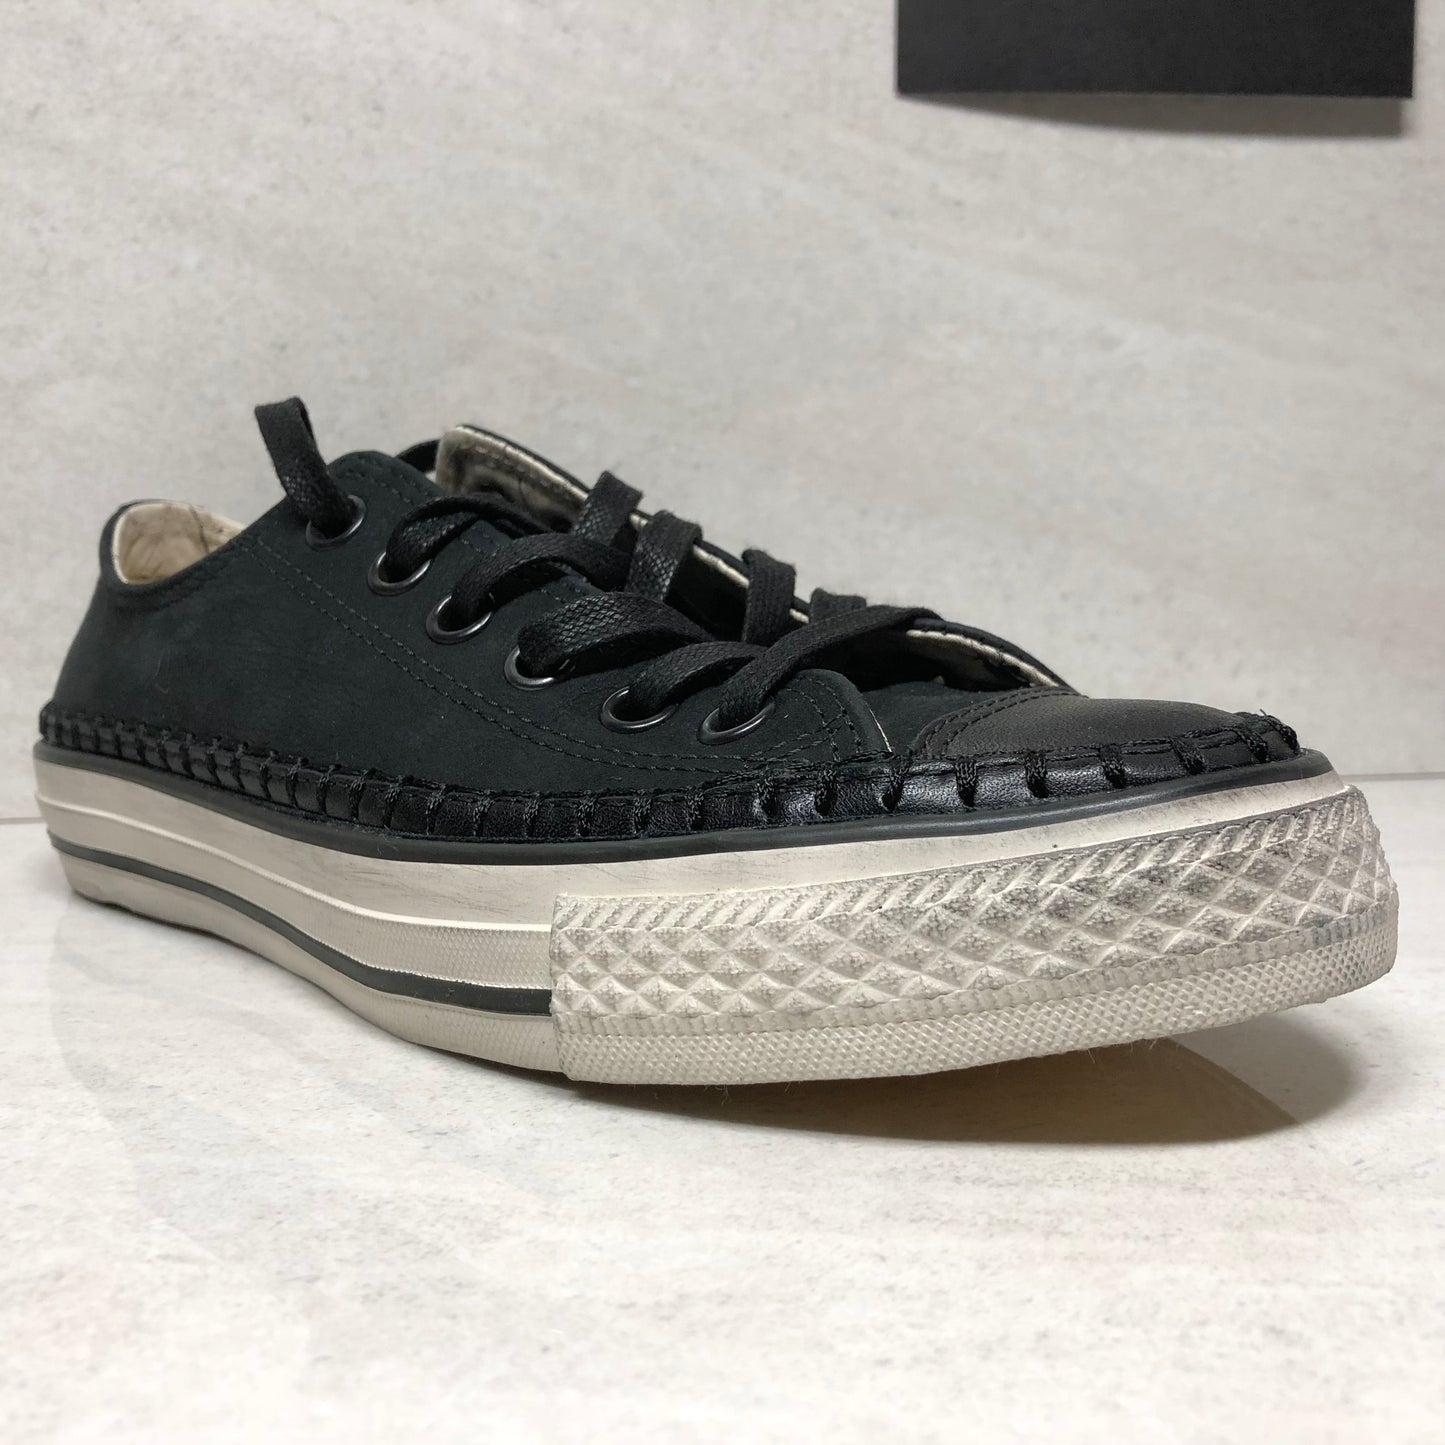 DS Converse Chuck Taylor Blankett Stitch Low Top Taille 4.5/Taille 6.5W Noir 151287C